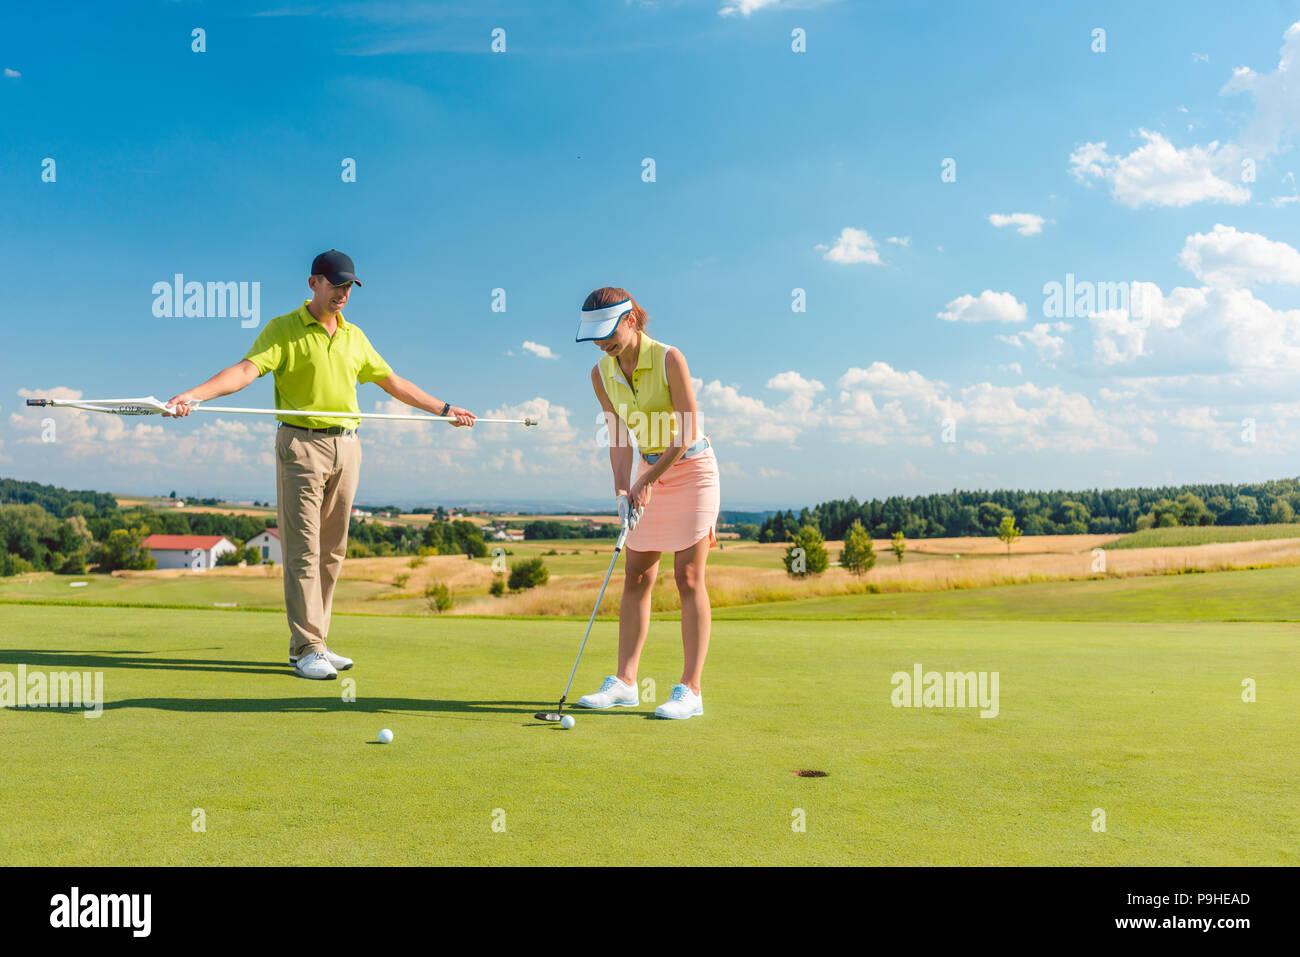 Full length of a woman playing professional golf with her male match partner Stock Photo